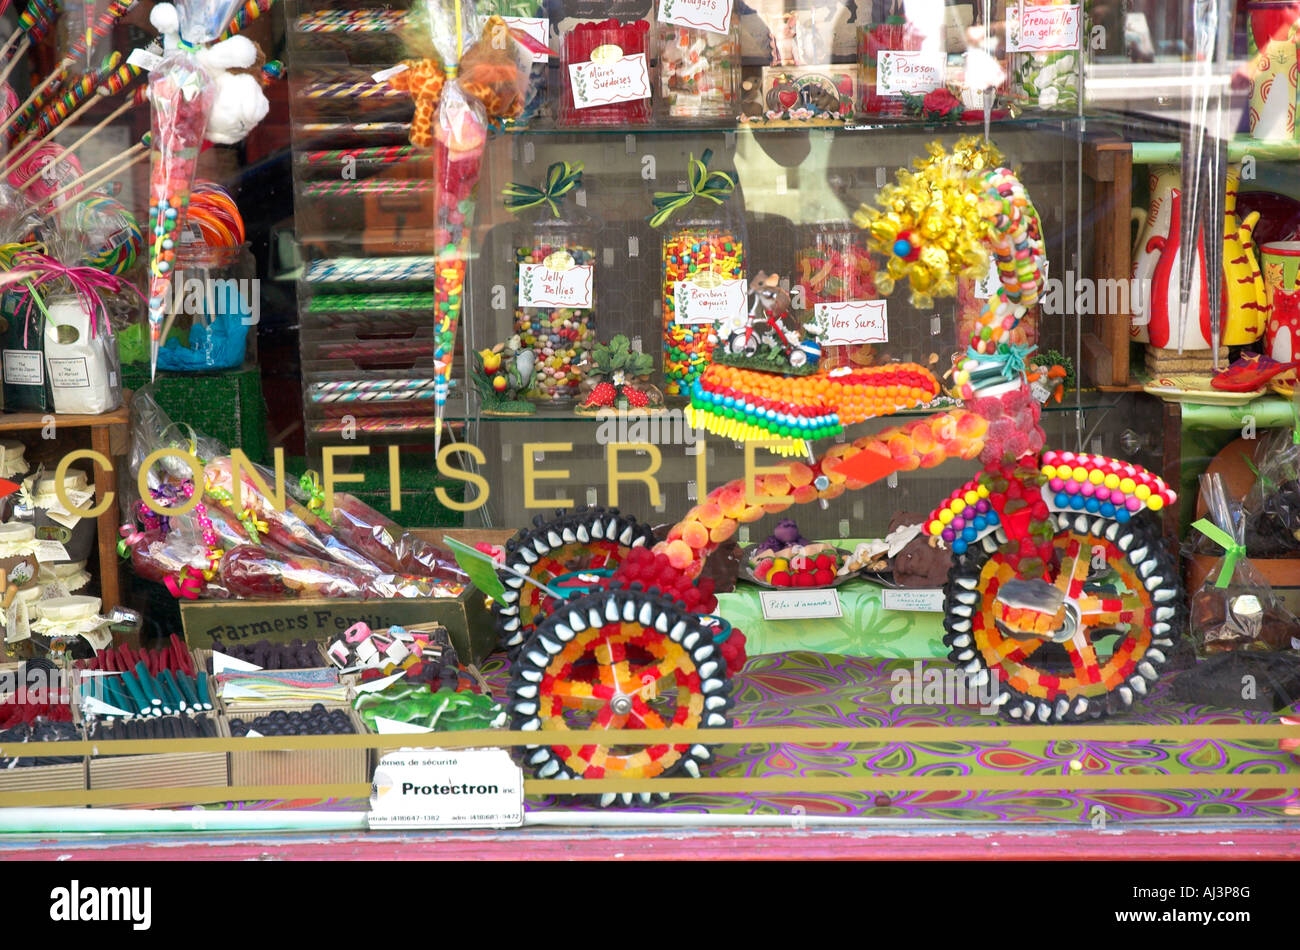 A childs tricycle made entirely of sweets in a shop window Stock Photo